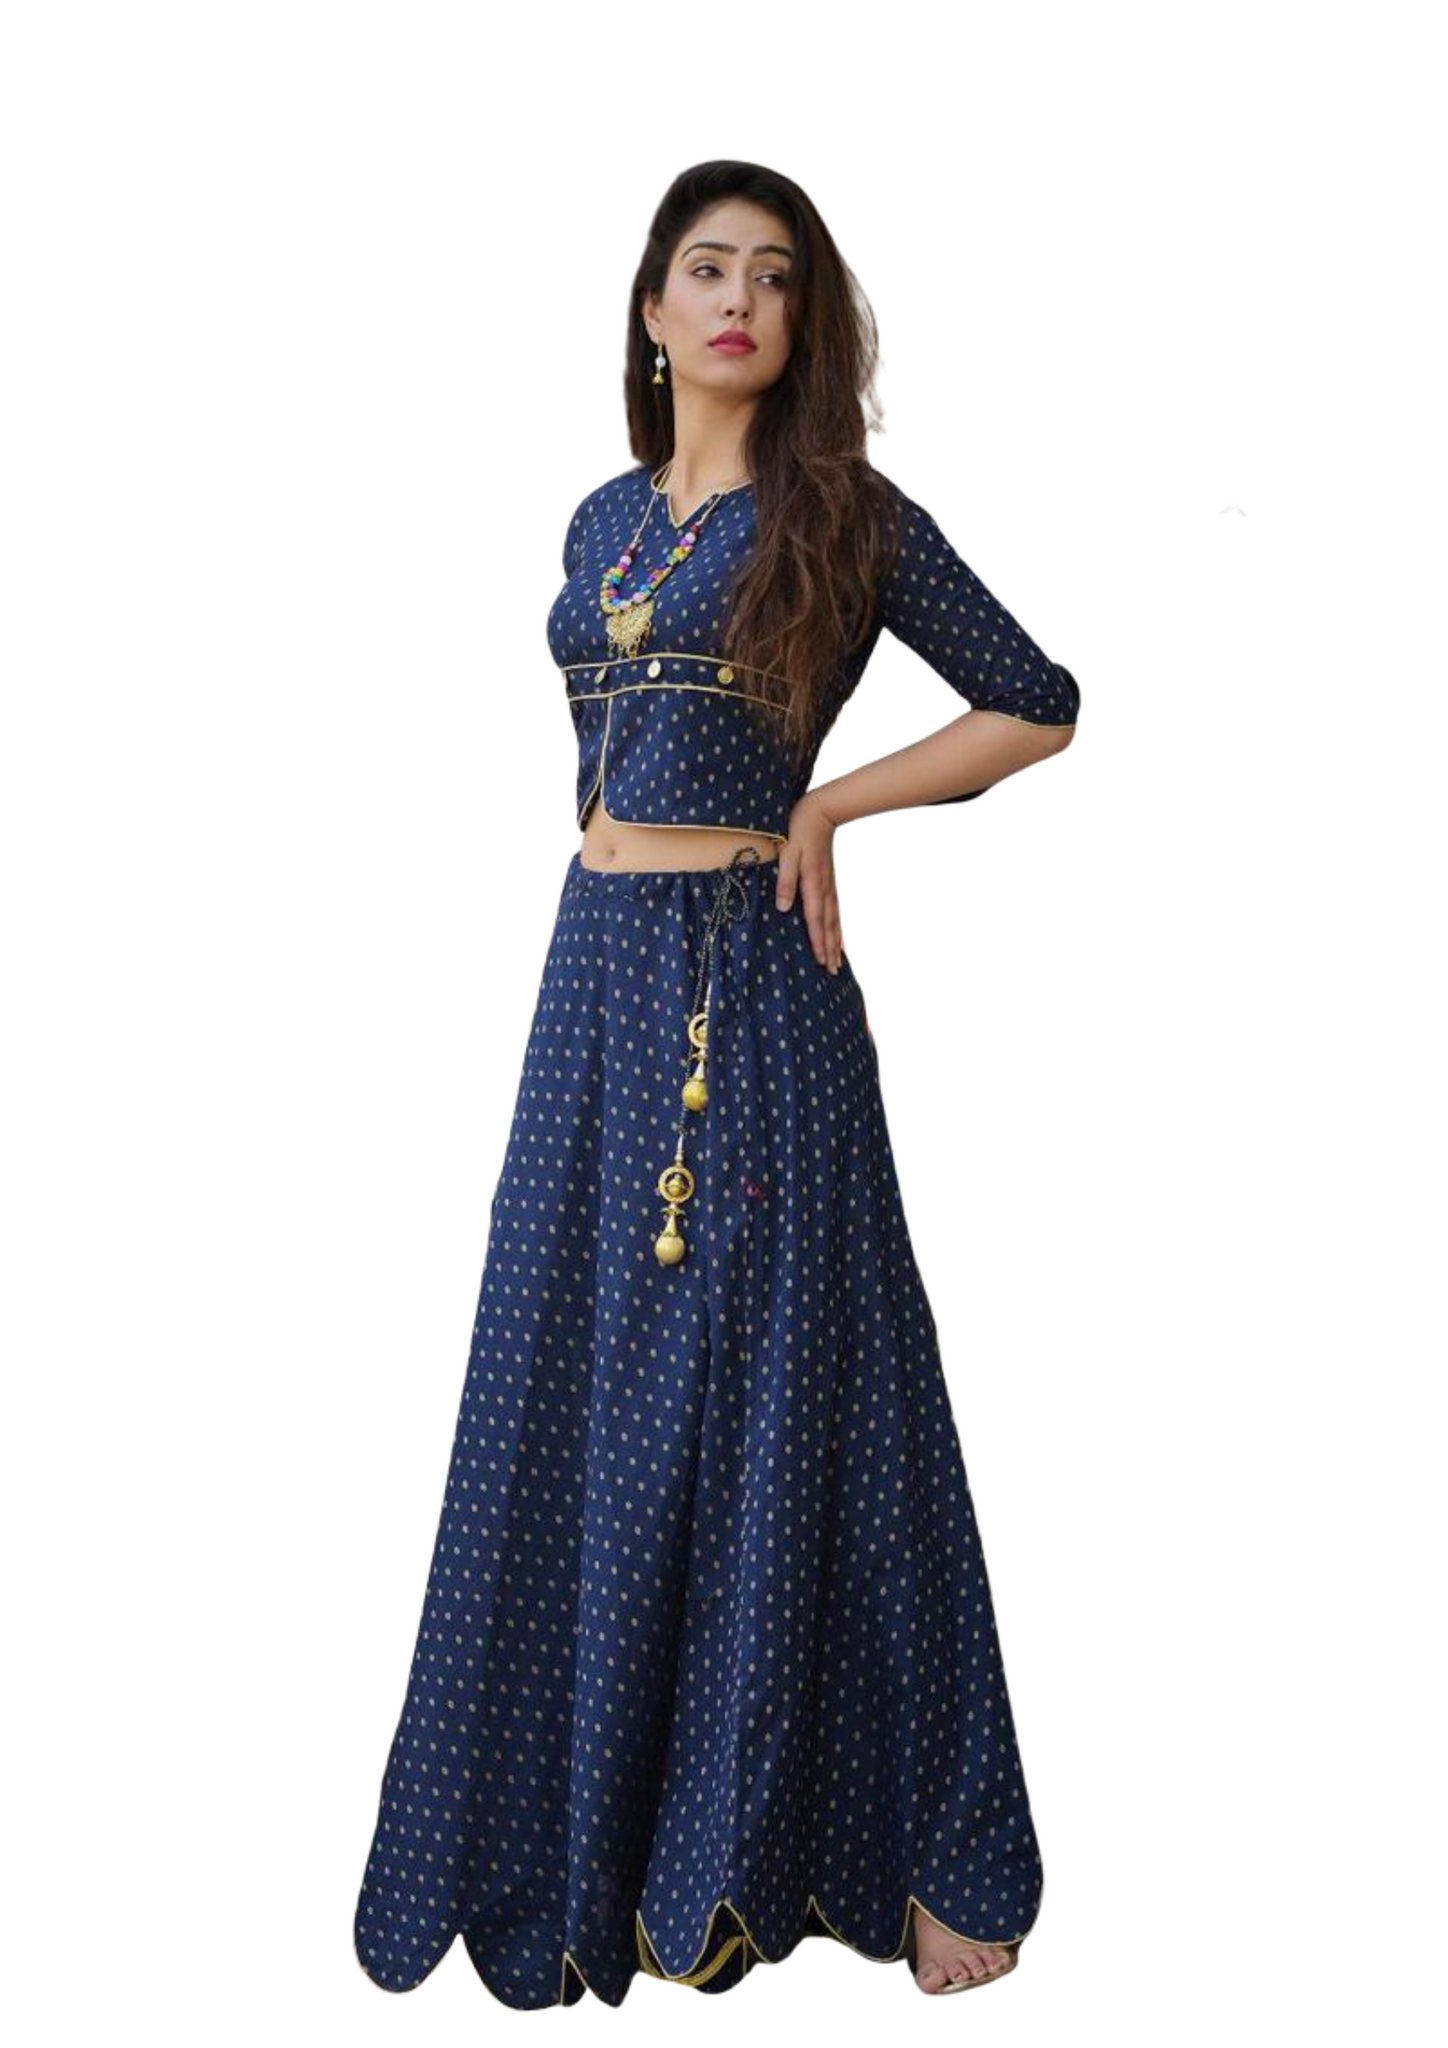 Designer Blue Lengha with Accessories [Pre-Order]